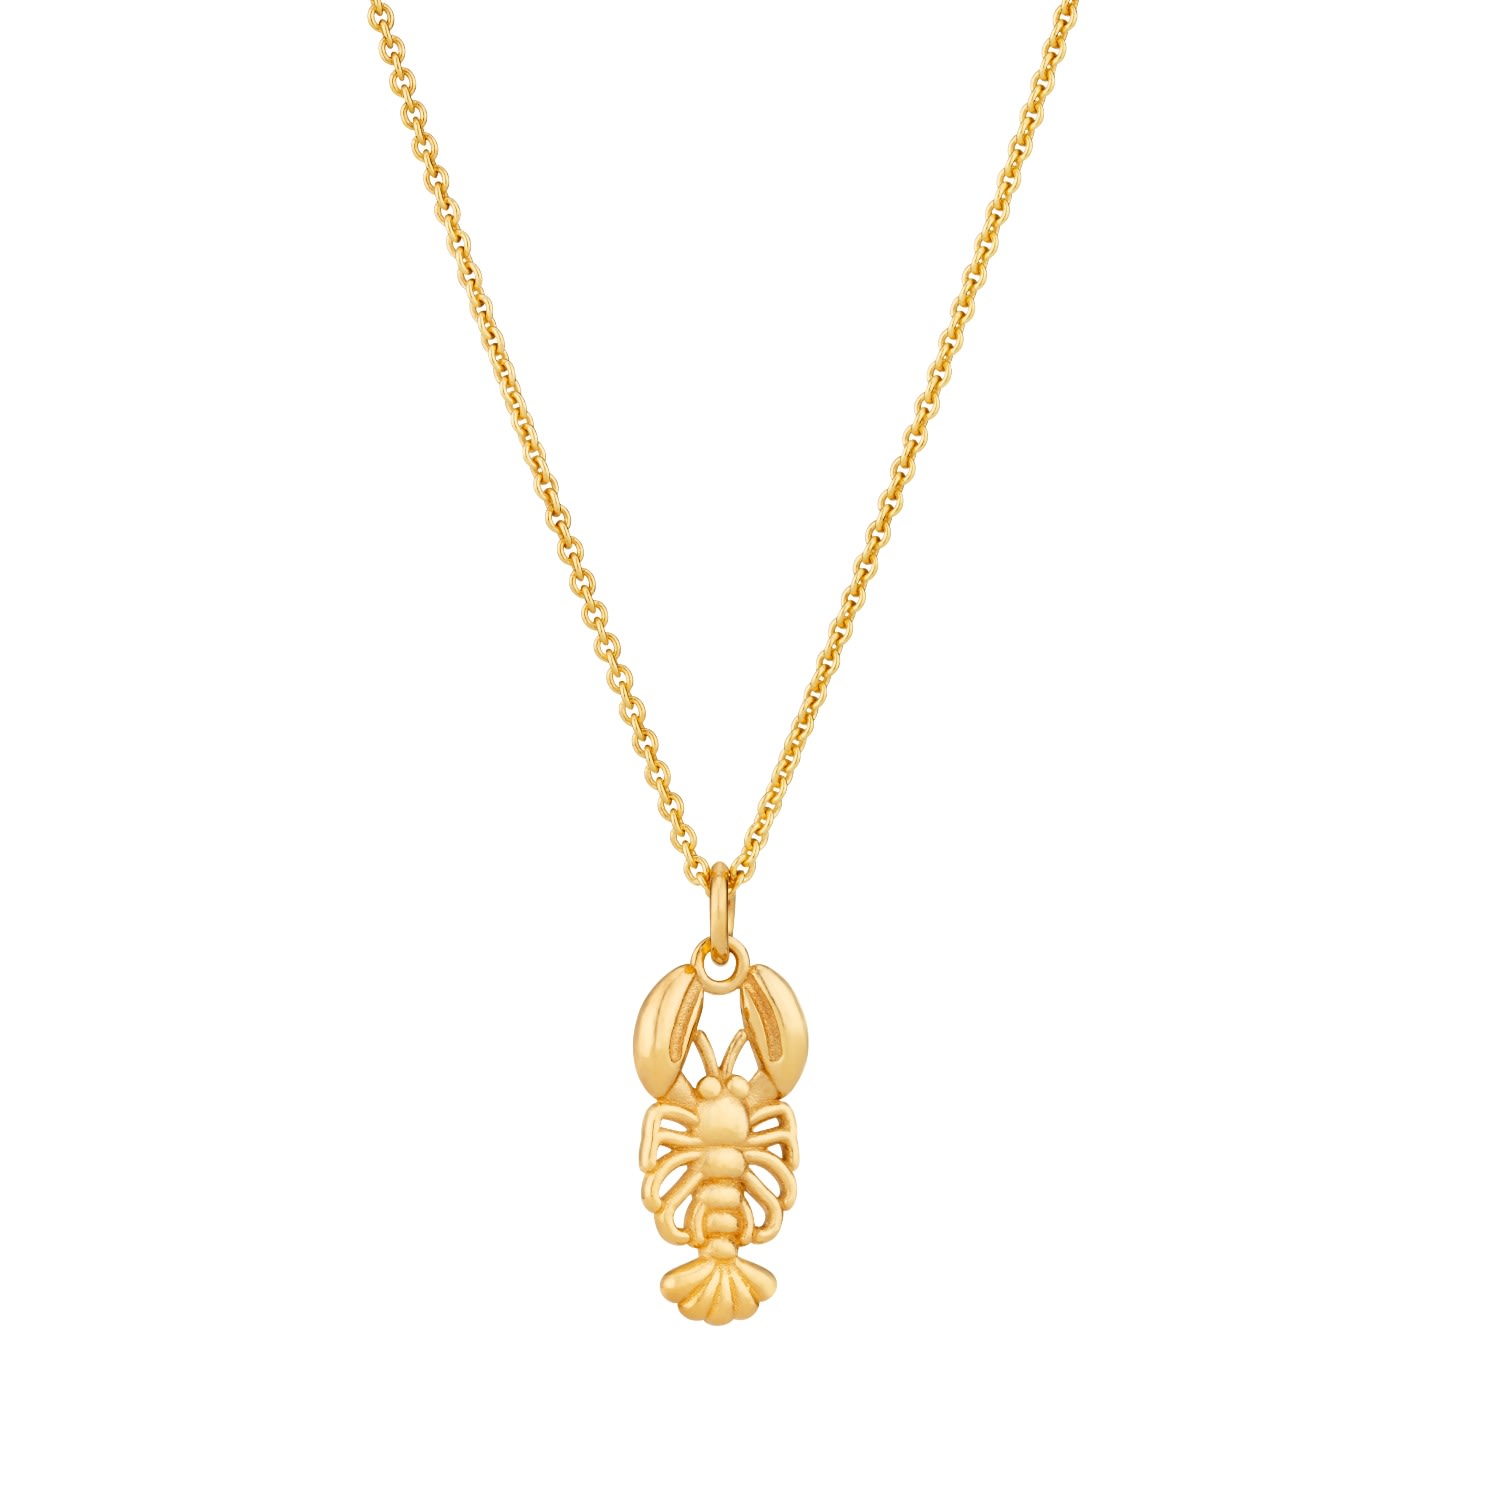 Women’s Yellow Gold Plated Lobster Charm Pendant Necklace Posh Totty Designs